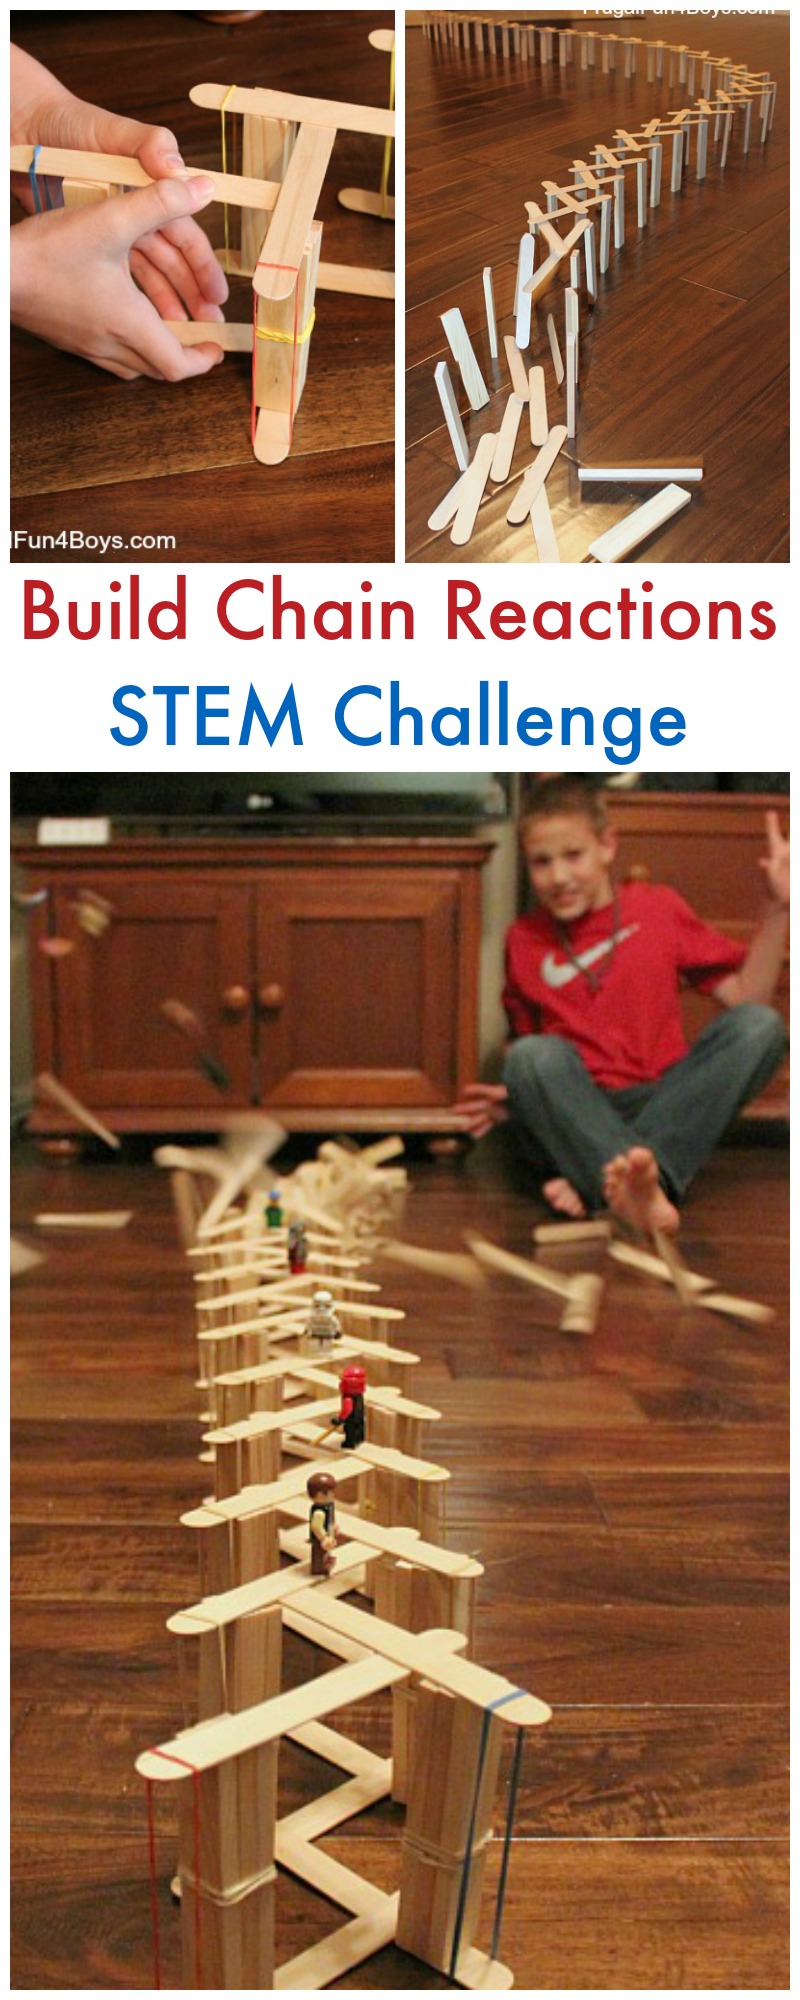 Build Chain Reactions with Craft Sticks